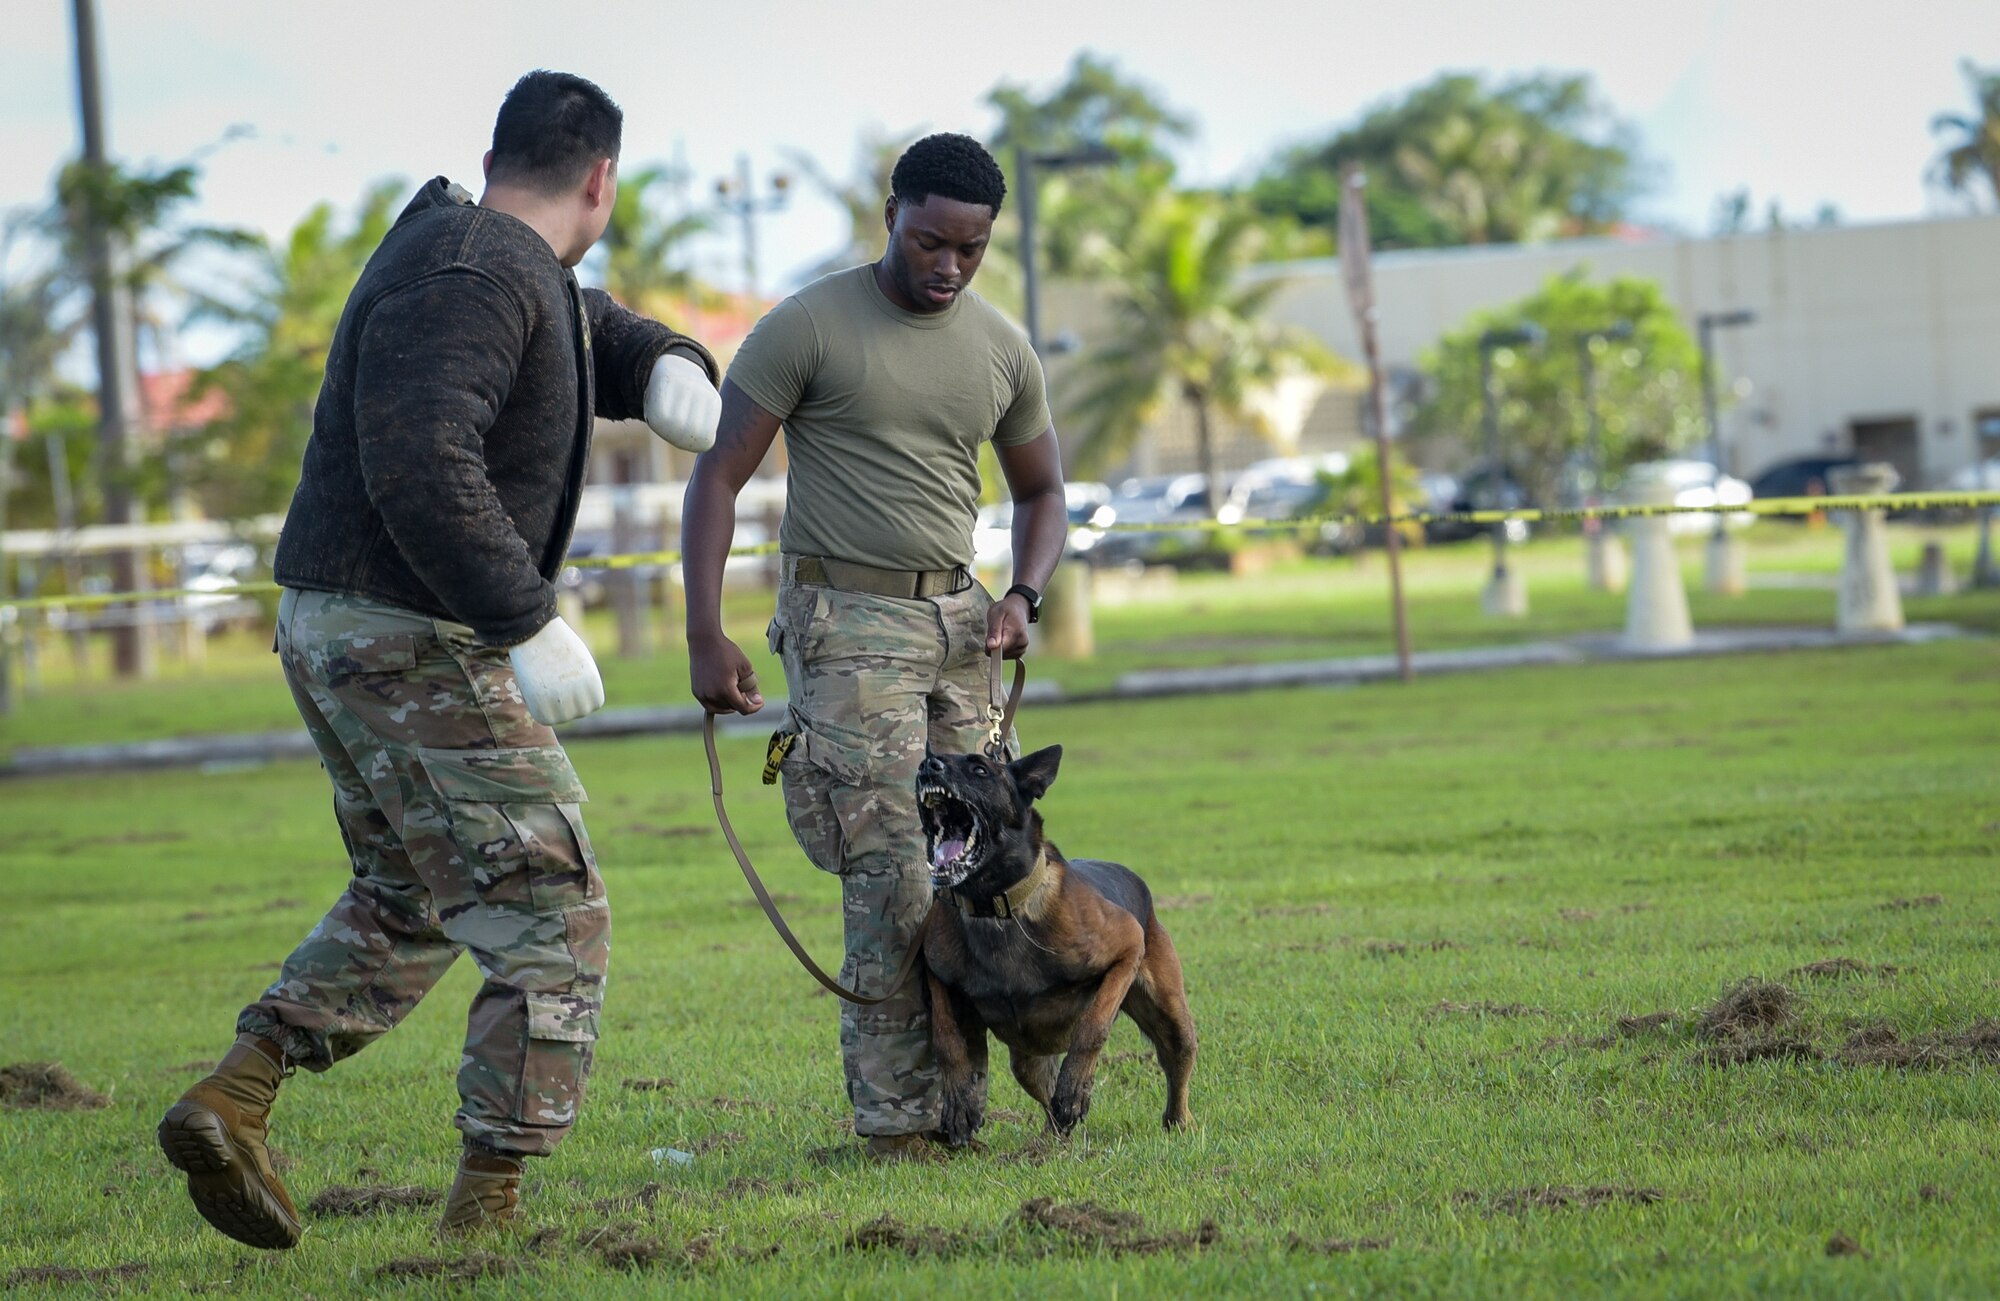 U.S. Air Force Col. David Aragon, 36th Wing vice commander, gets bit by a military working dog during a MWD demonstration at Andersen Air Force Base, Guam, Oct. 18, 2021.